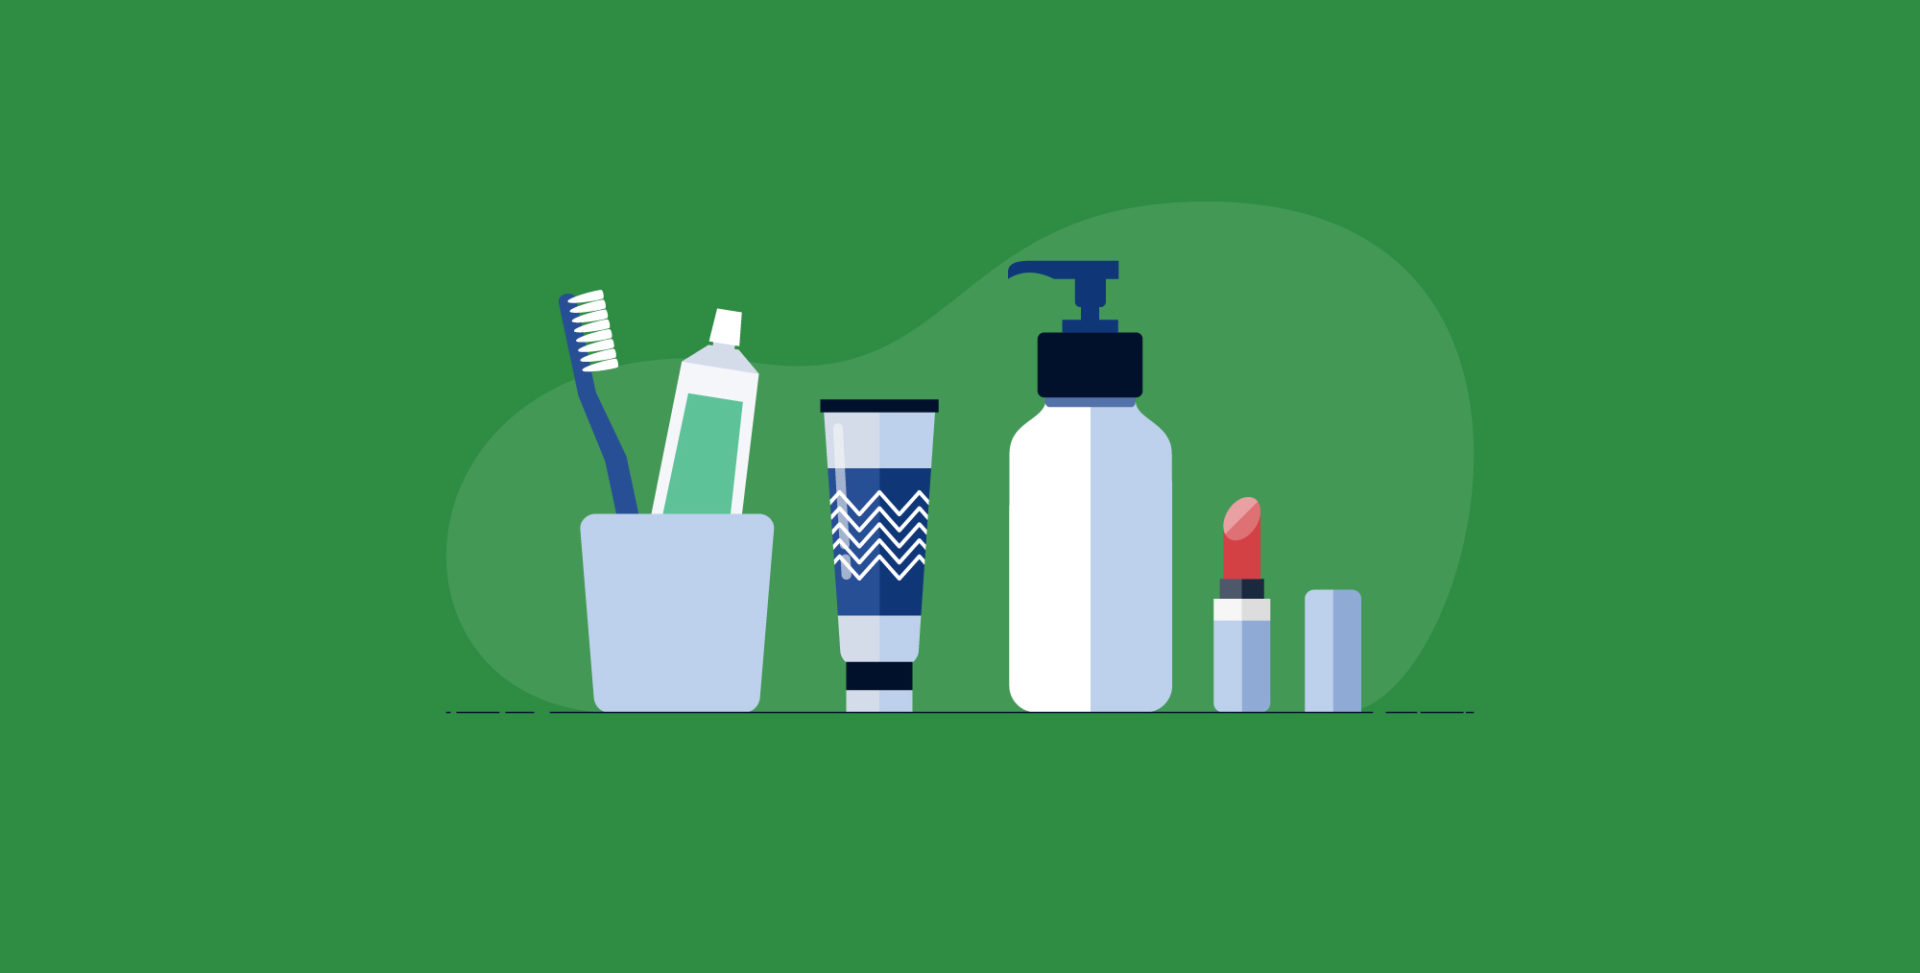 Learn how to ship toiletries with ShippingEasy!